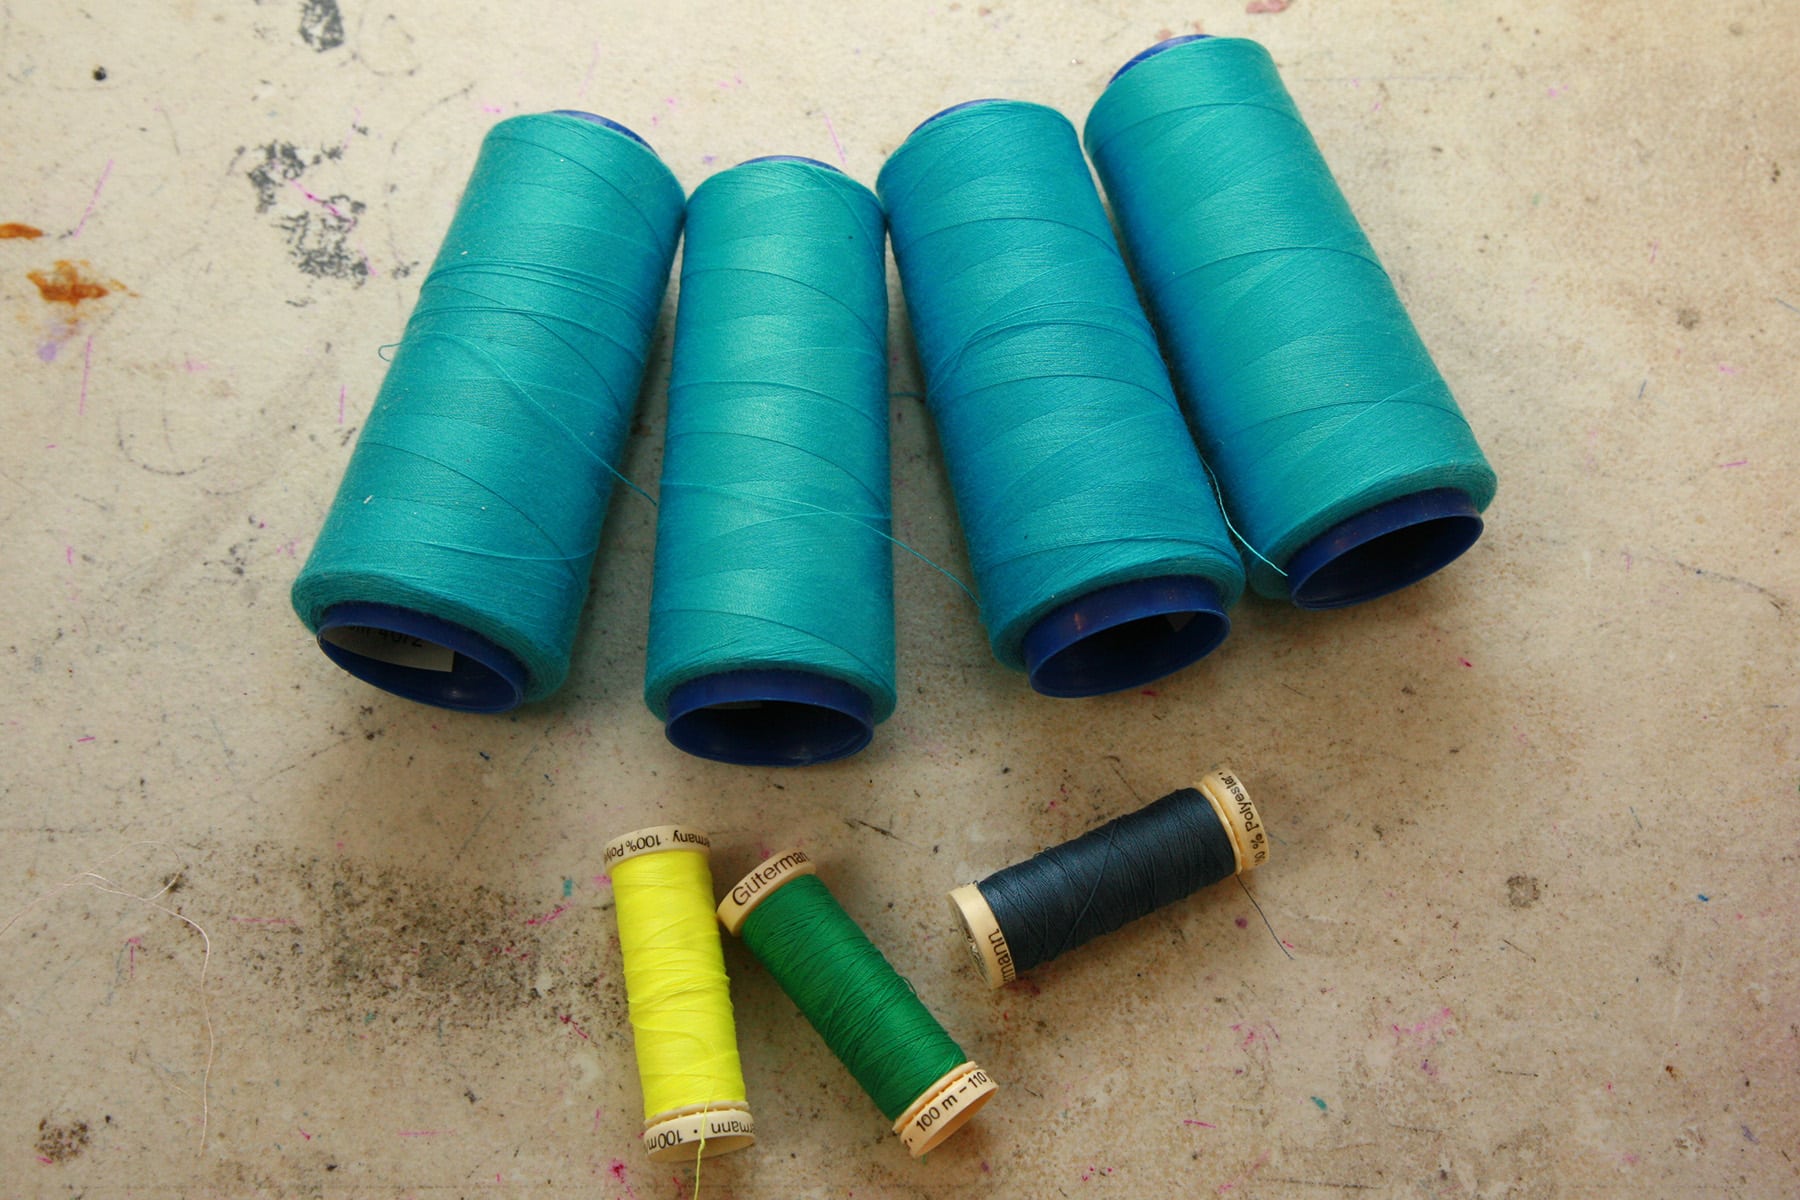 A selection of thread spools in various colours are shown on a work table.